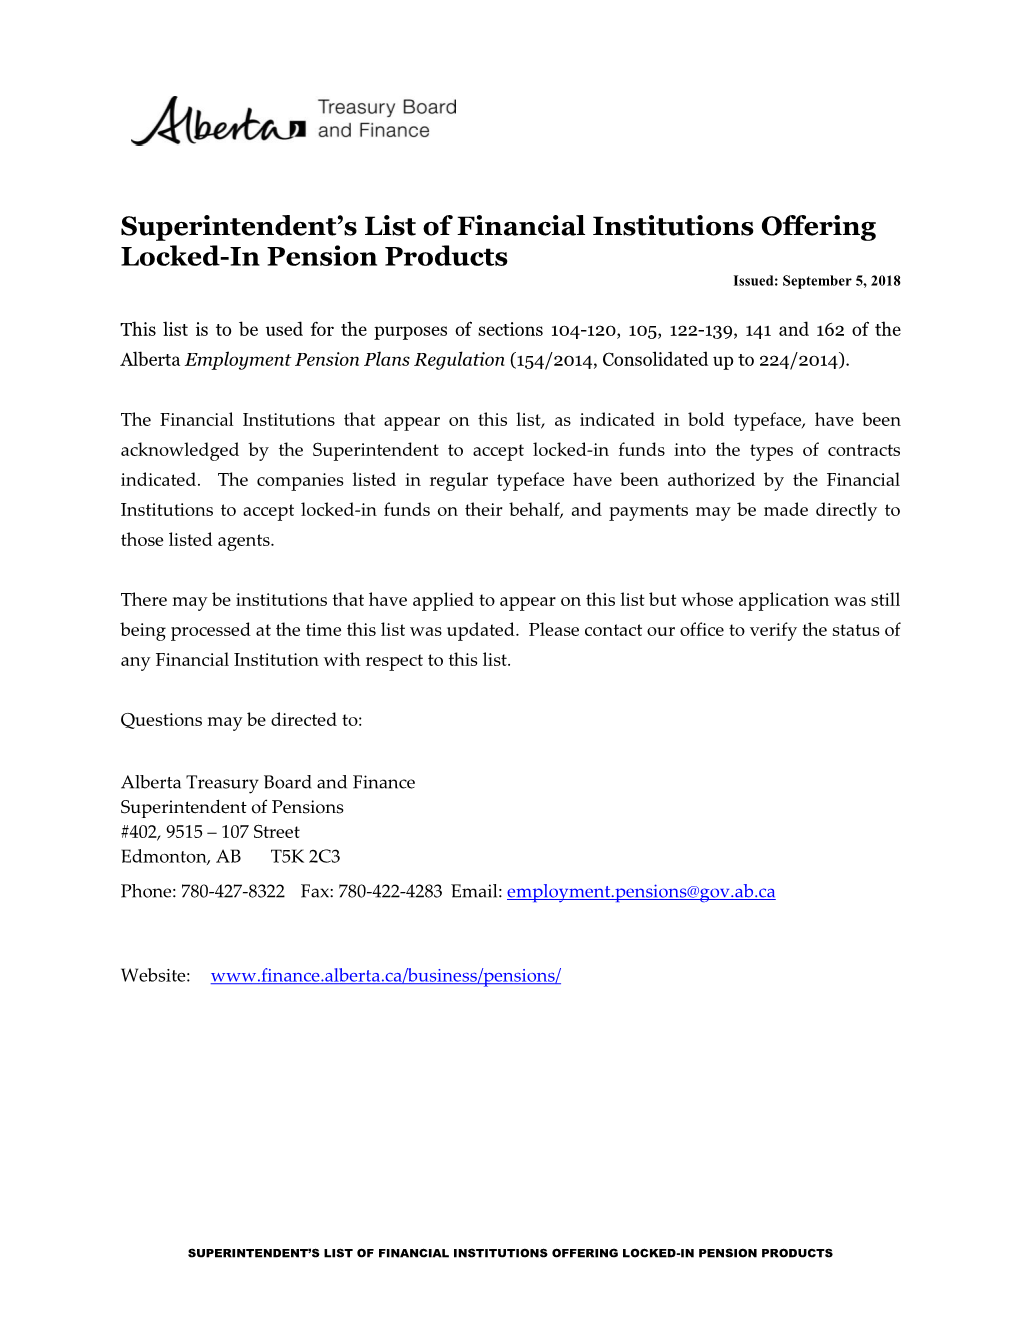 List of Financial Institutions Offering Locked-In Pension Products Issued: September 5, 2018